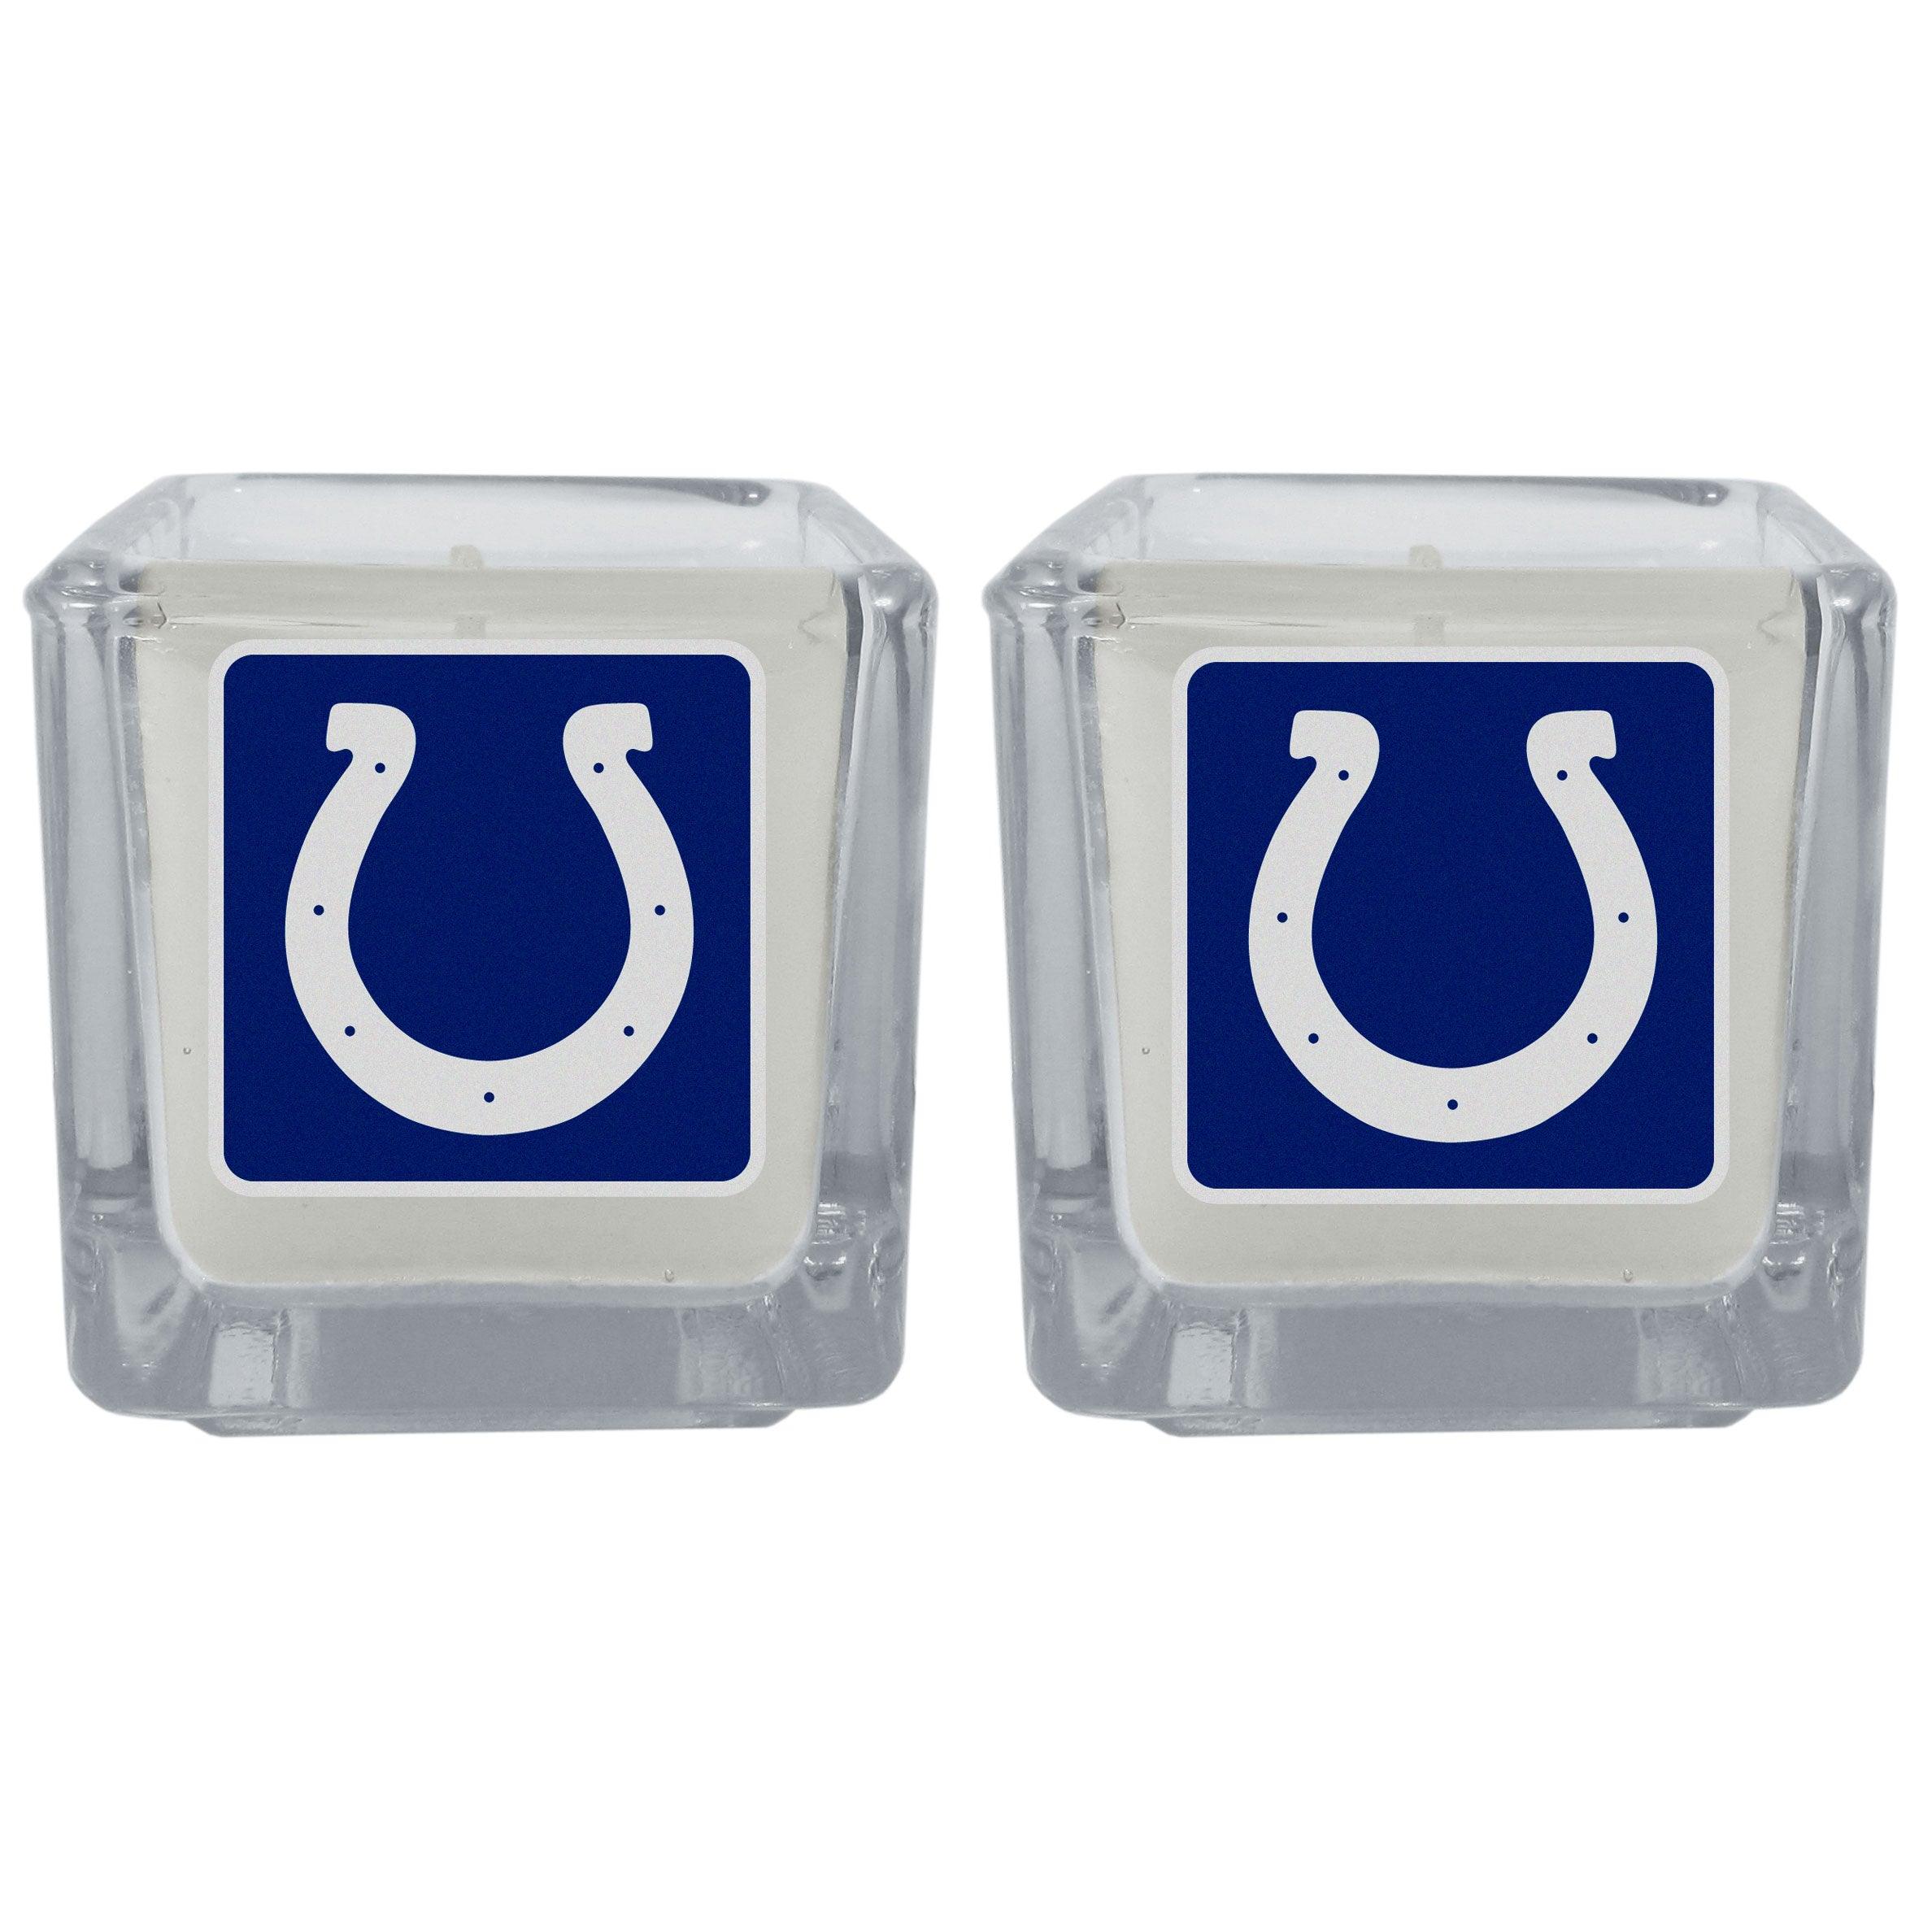 Indianapolis Colts Graphics Candle Set - Flyclothing LLC